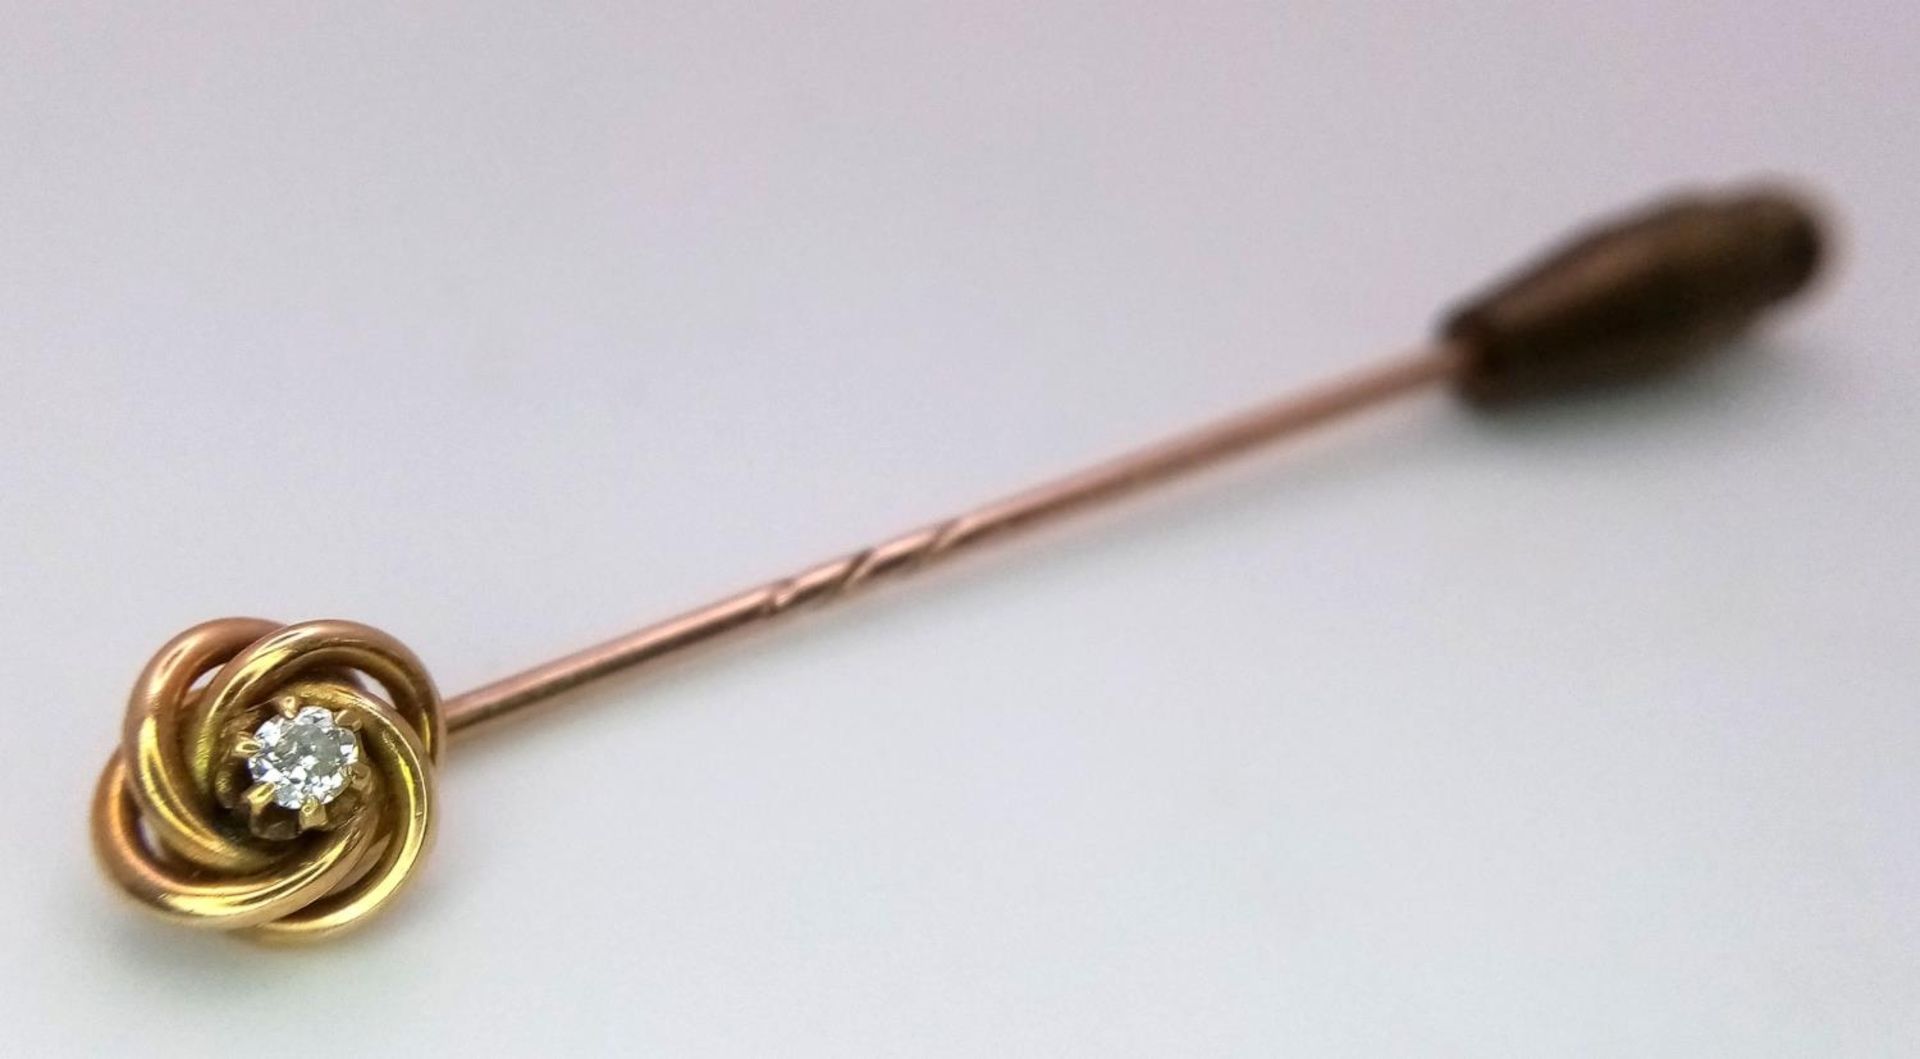 A Gorgeous Antique 15K Yellow Gold and Diamond Stick Pin. 1.5g total weight. Weight does not include